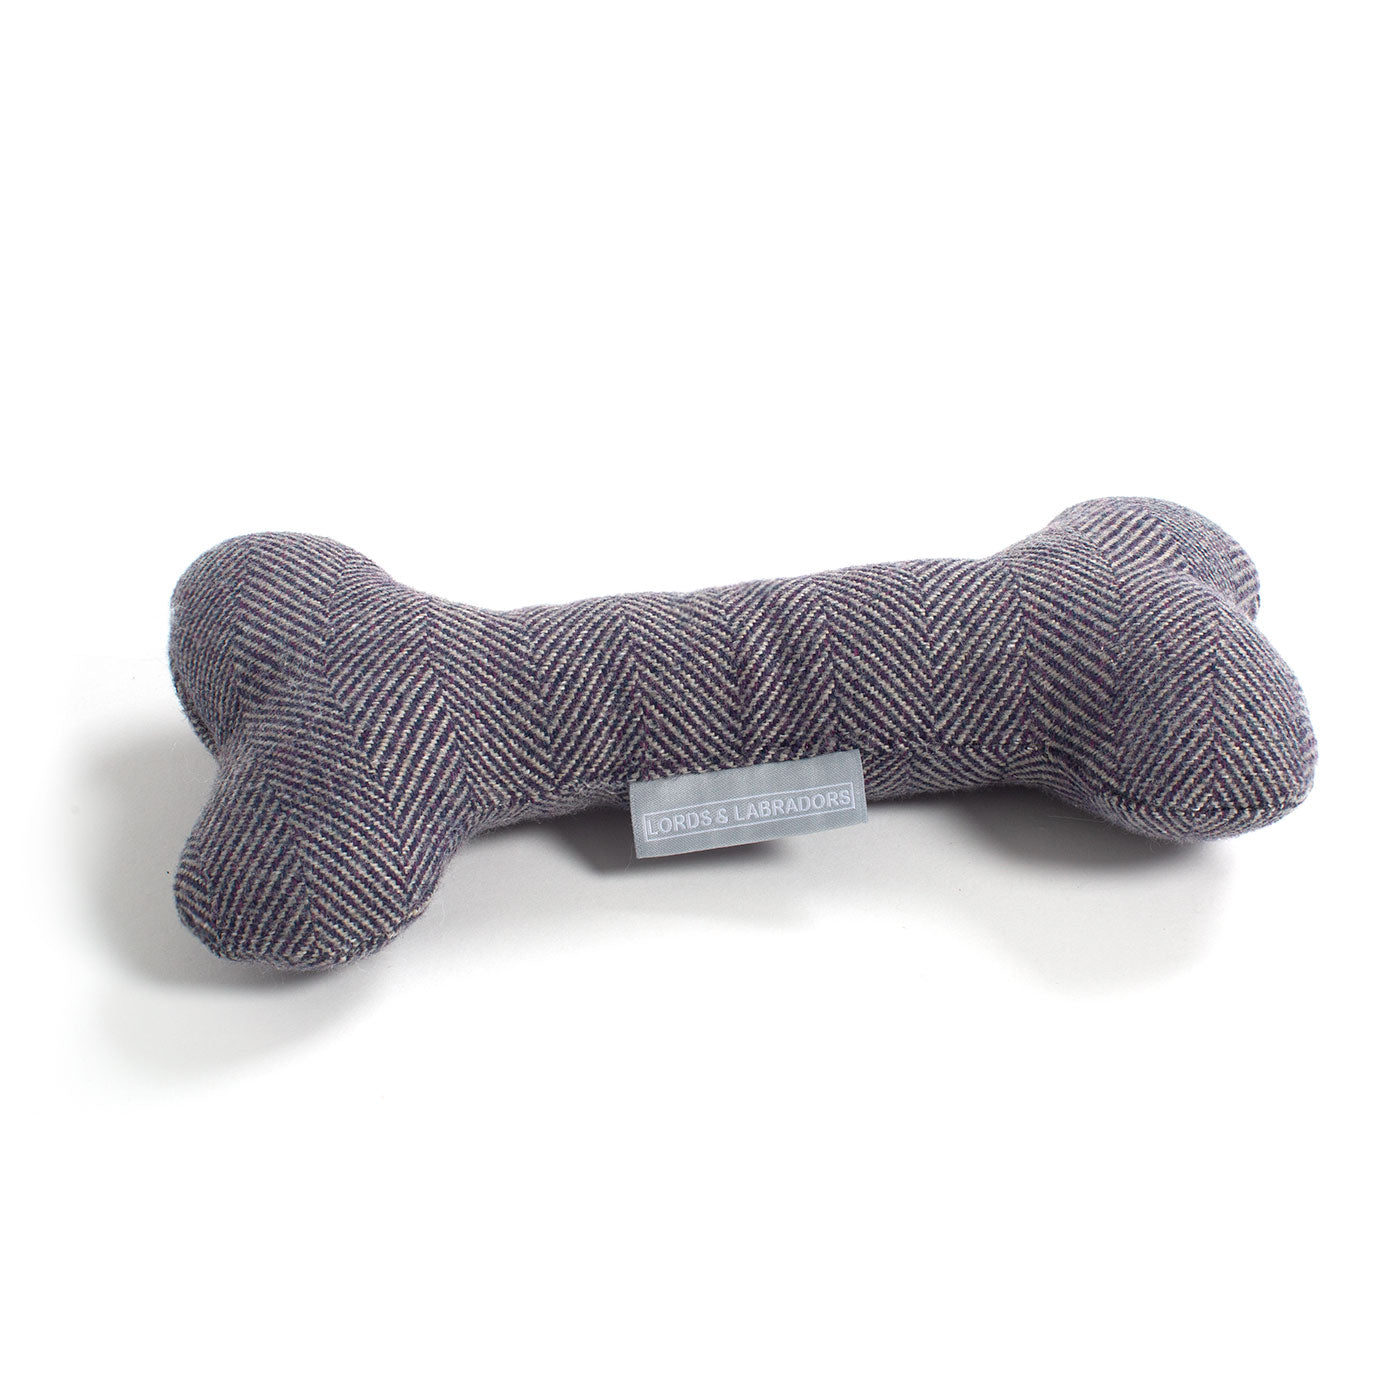 Present The Perfect Pet Playtime With Our Luxury Dog Bone Toy, In Stunning Oxford Herringbone Tweed! Available To Personalise Now at Lords & Labradors    